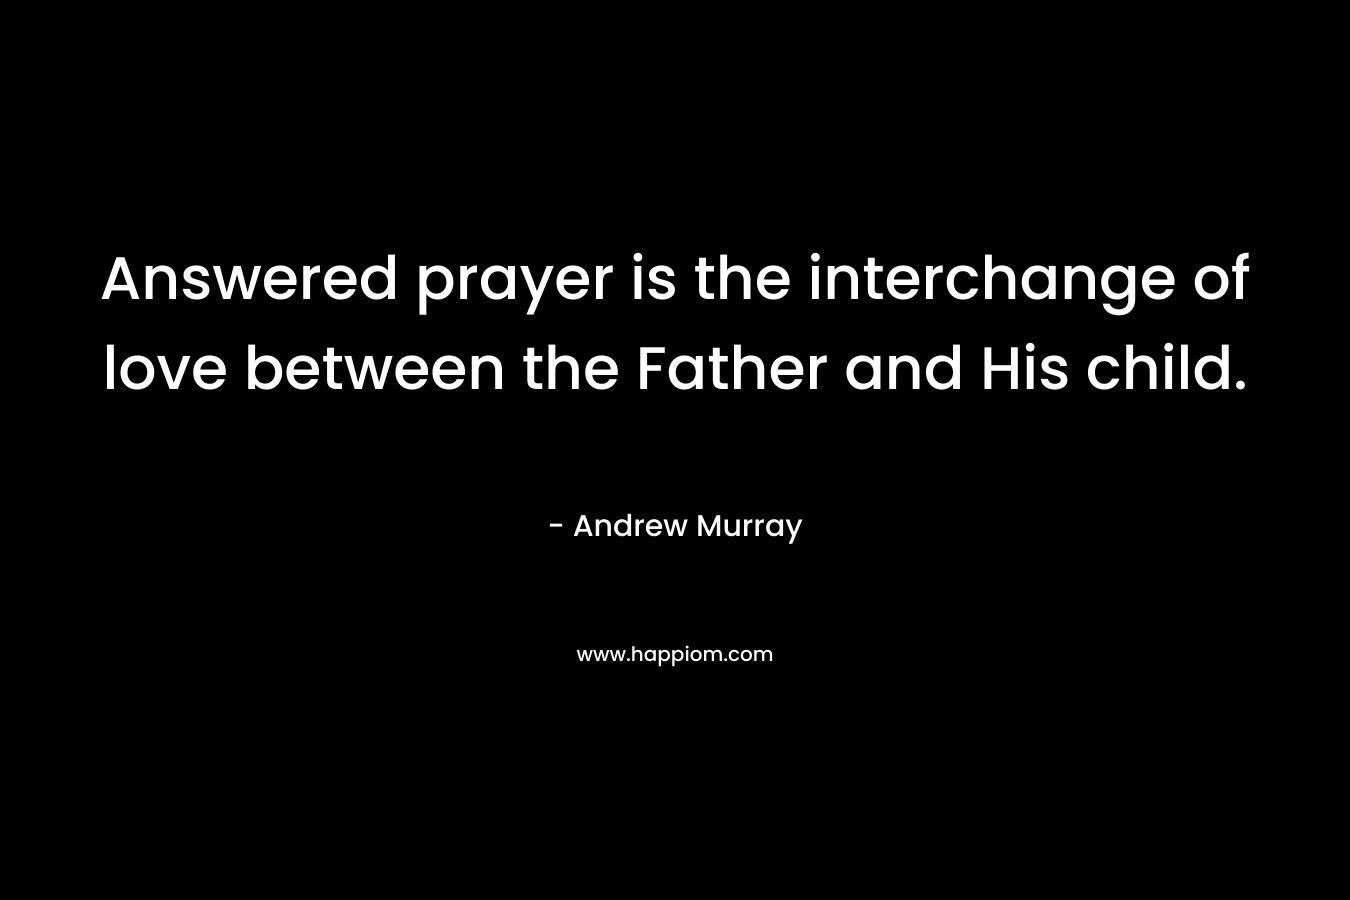 Answered prayer is the interchange of love between the Father and His child. – Andrew Murray